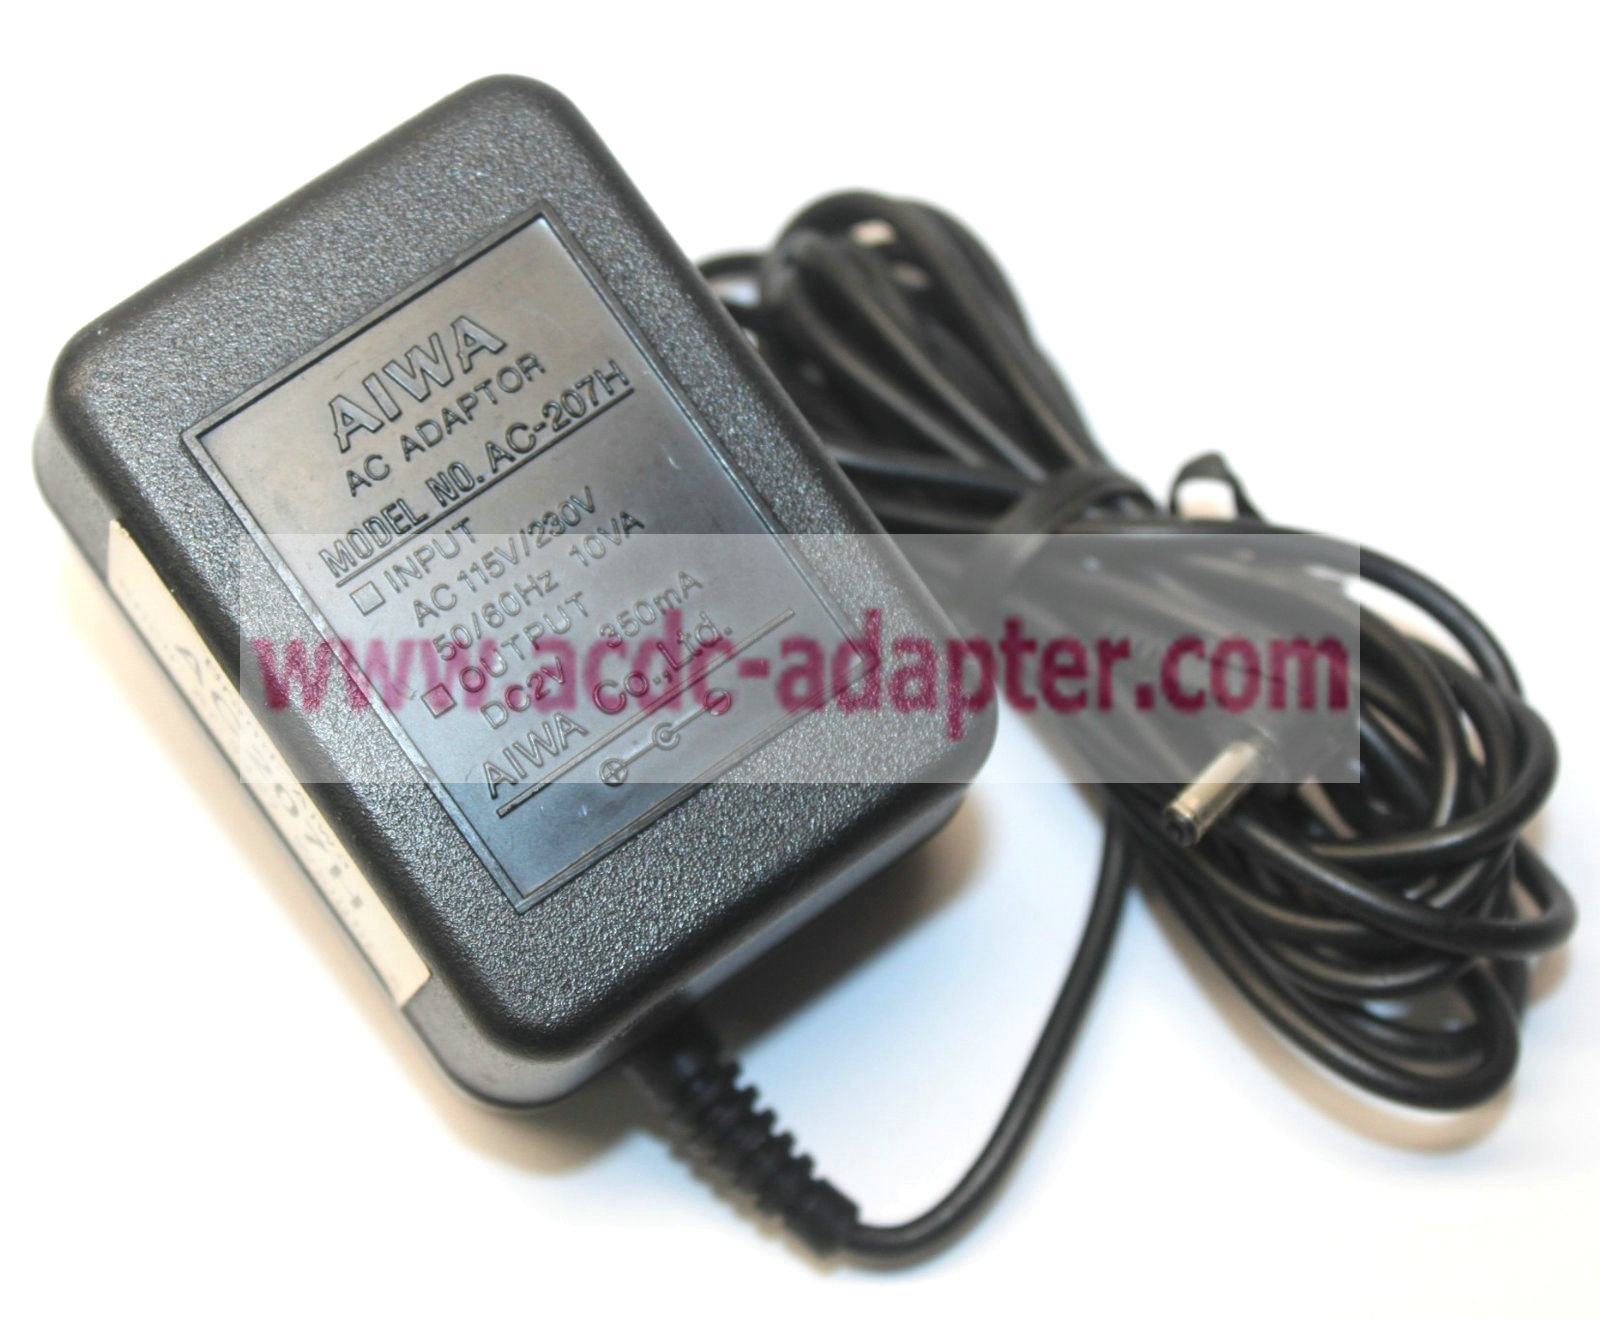 Brand new 12V 350 mA Aiwa AC-207H AC Adapter Power Supply Wall Plug-In Charger